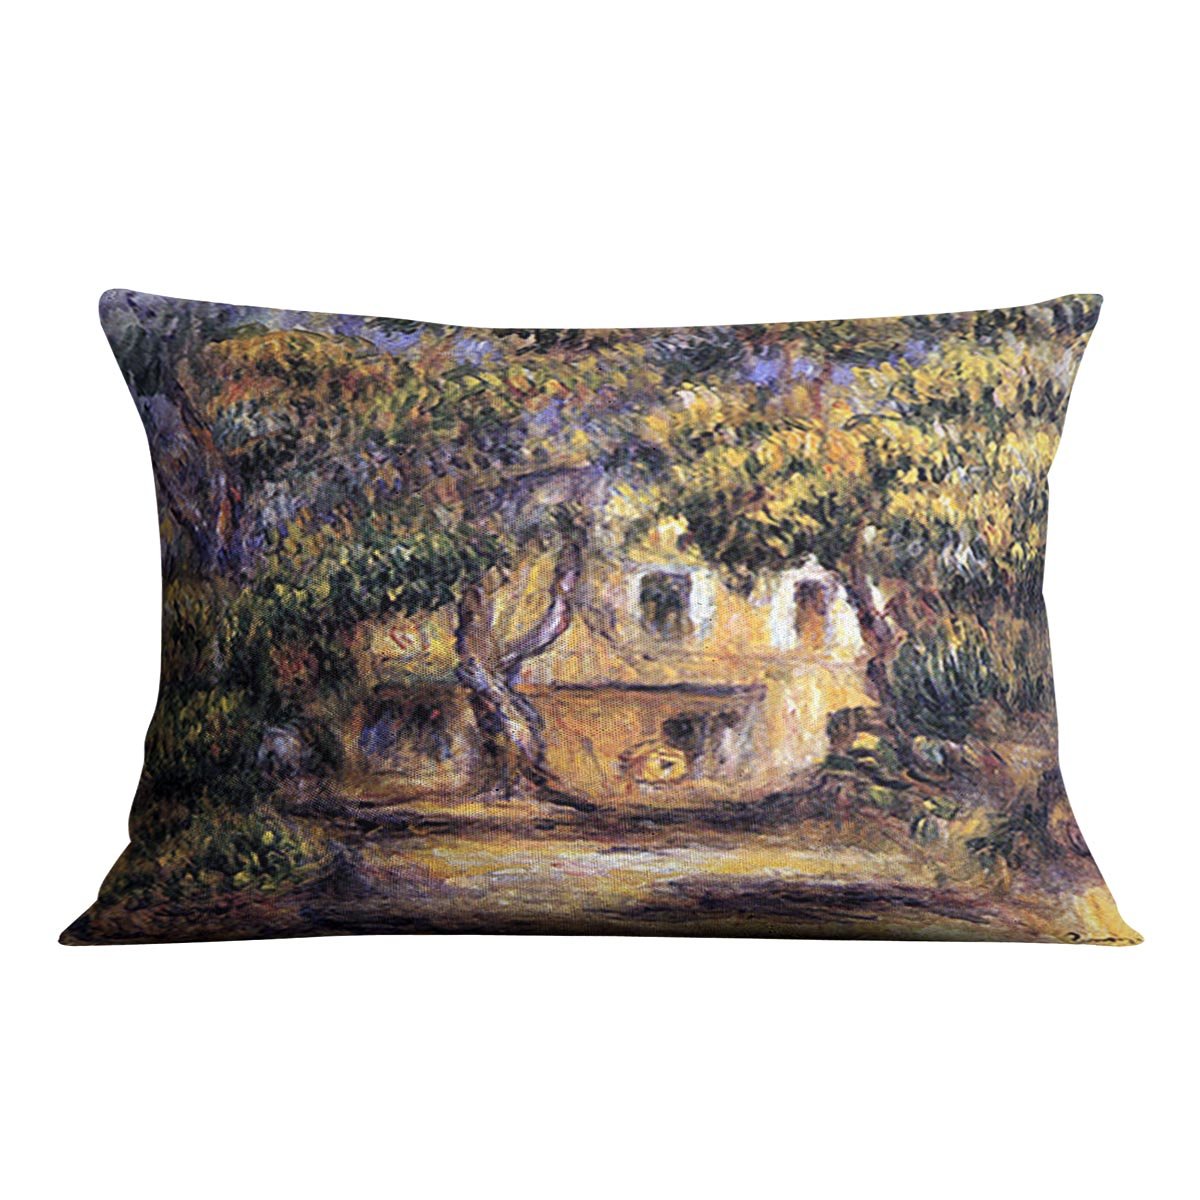 The farm at Les Collettes by Renoir Throw Pillow